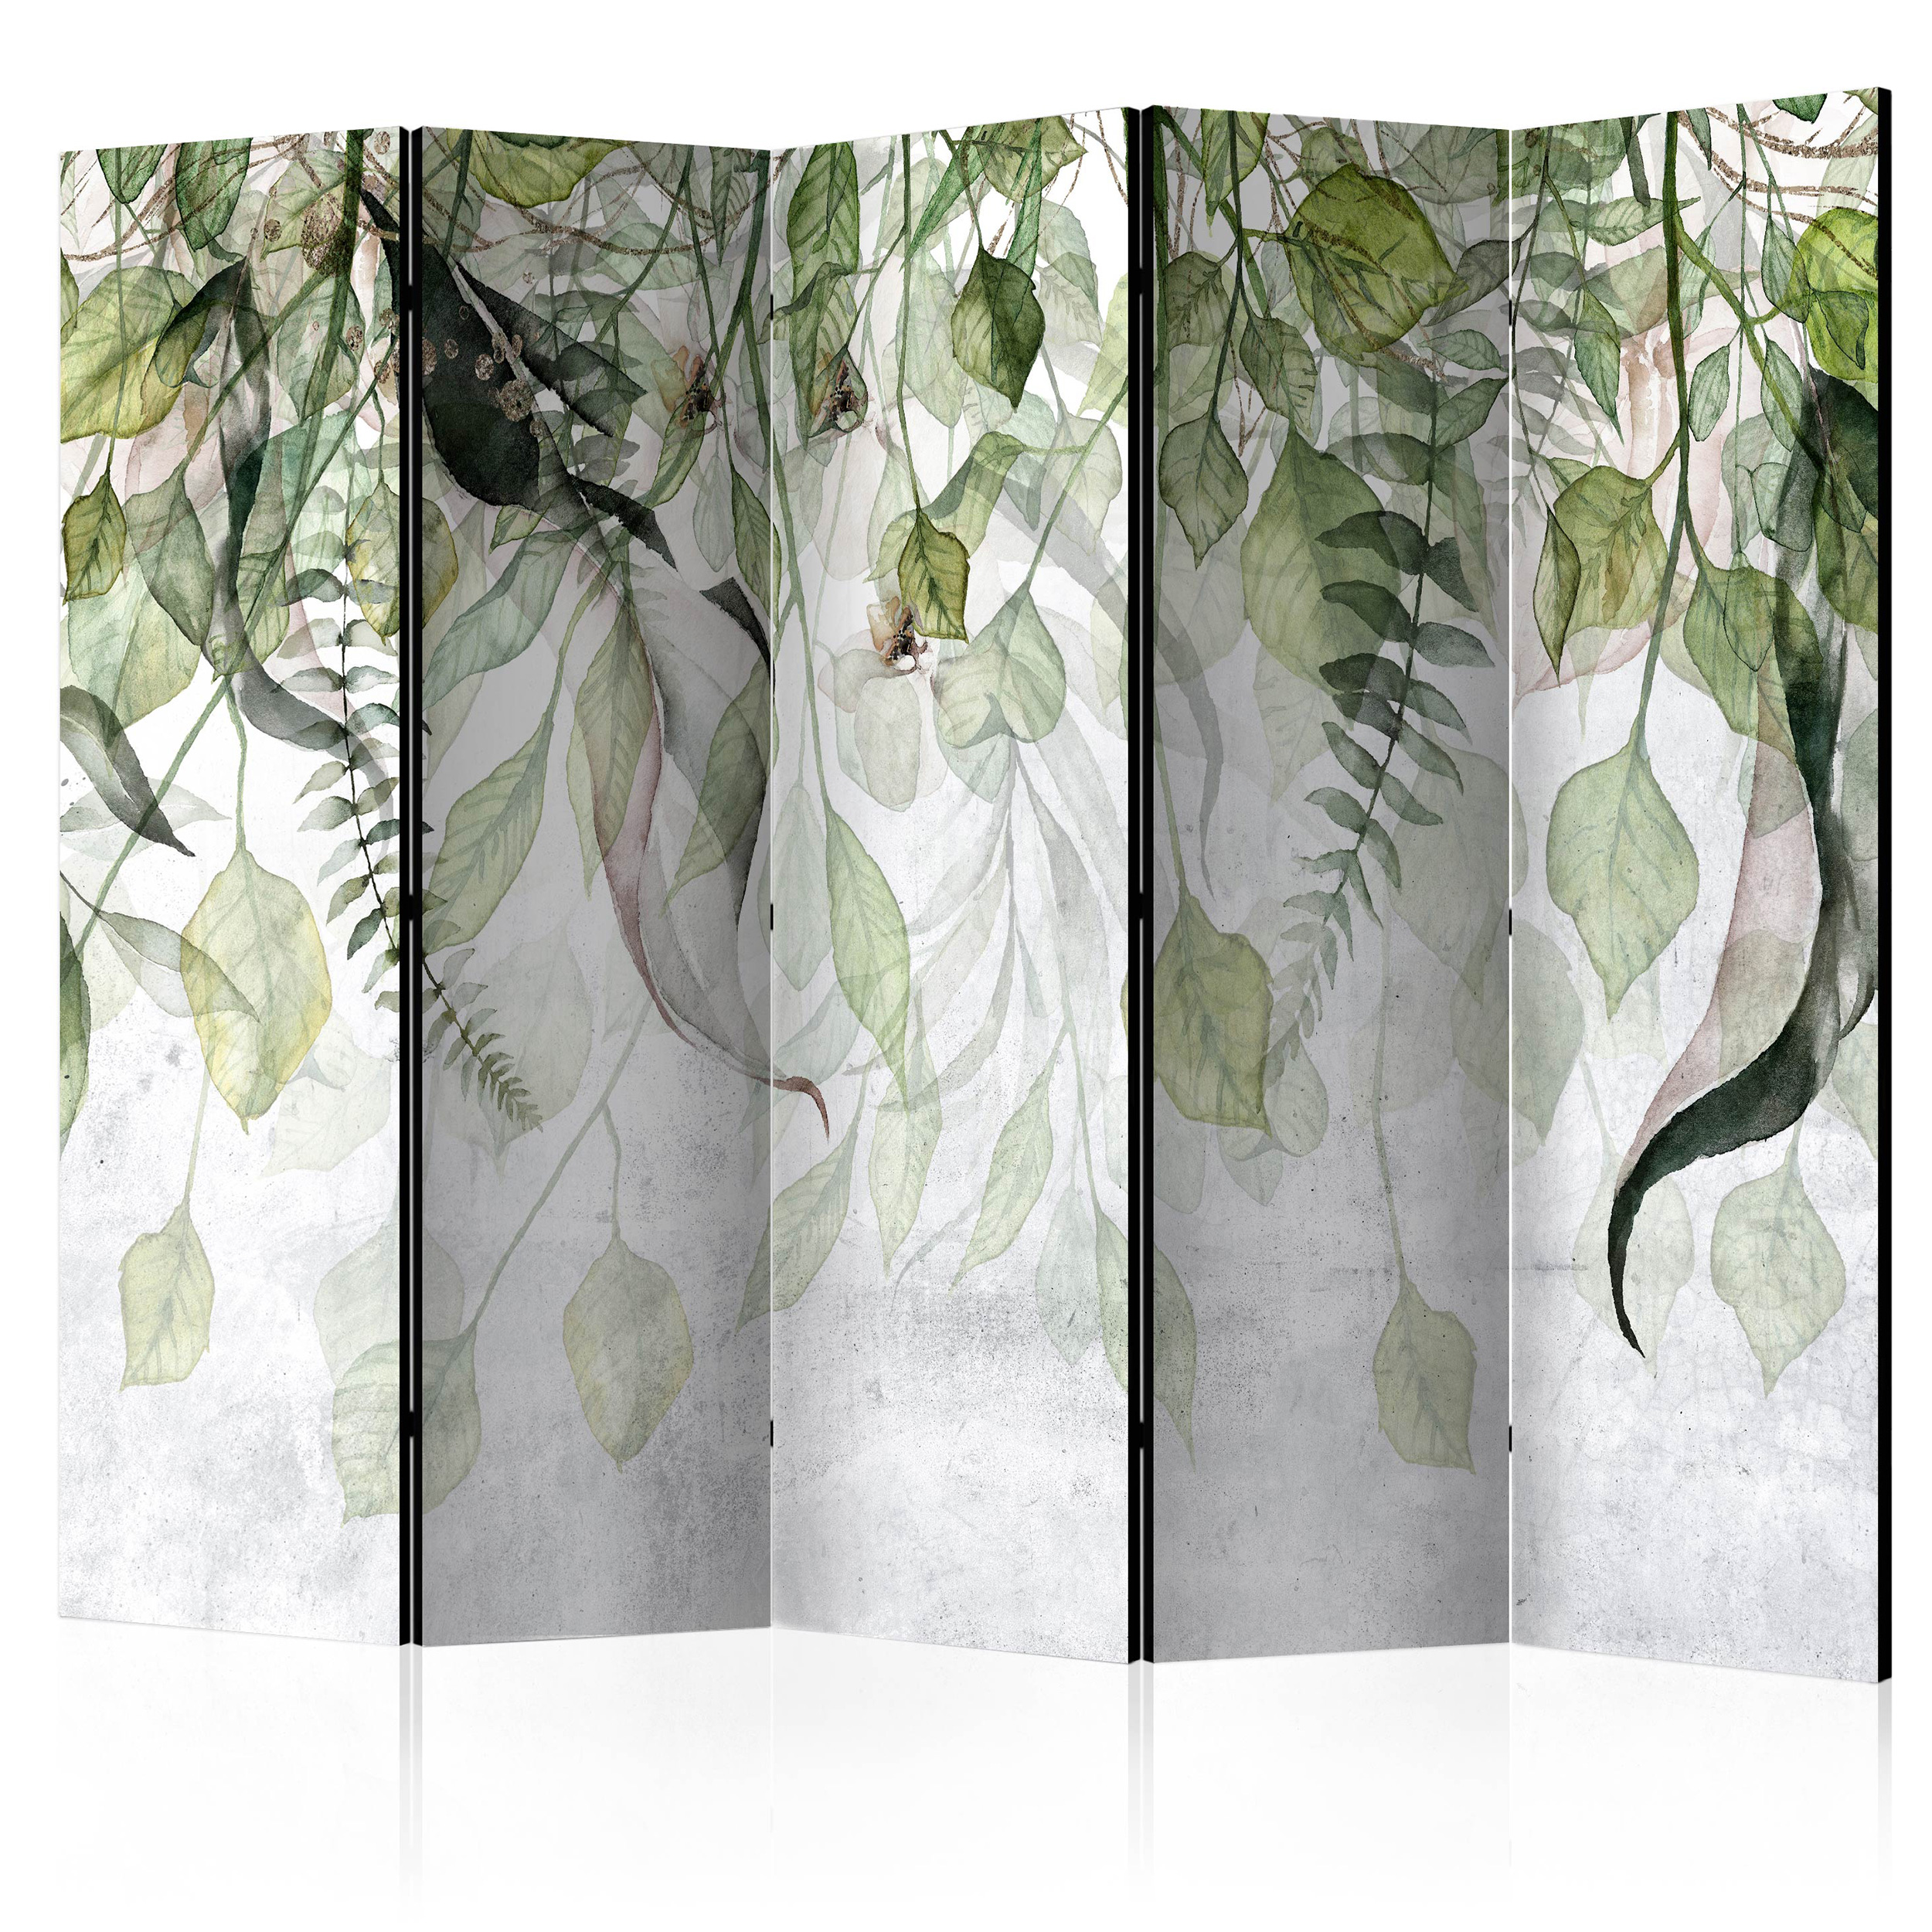 ROOM PARTITION Leaves | SCREEN SPANISH Flowers Leaves DIVIDER eBay WALL Pastel Natural